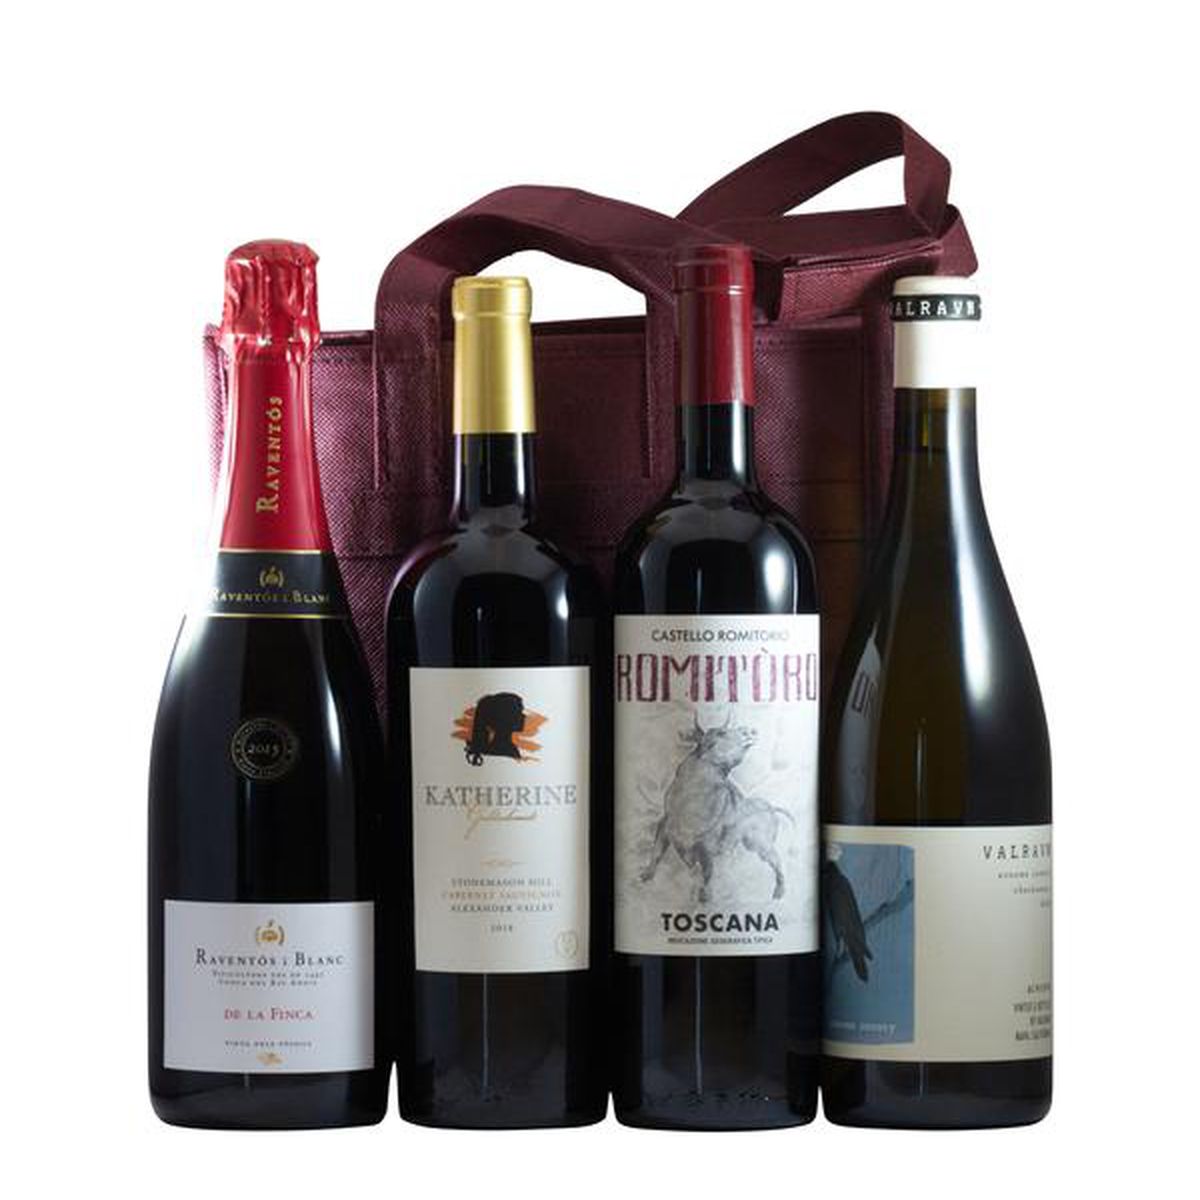 Four bottles of red wine stand in front of a wine tote on a white background